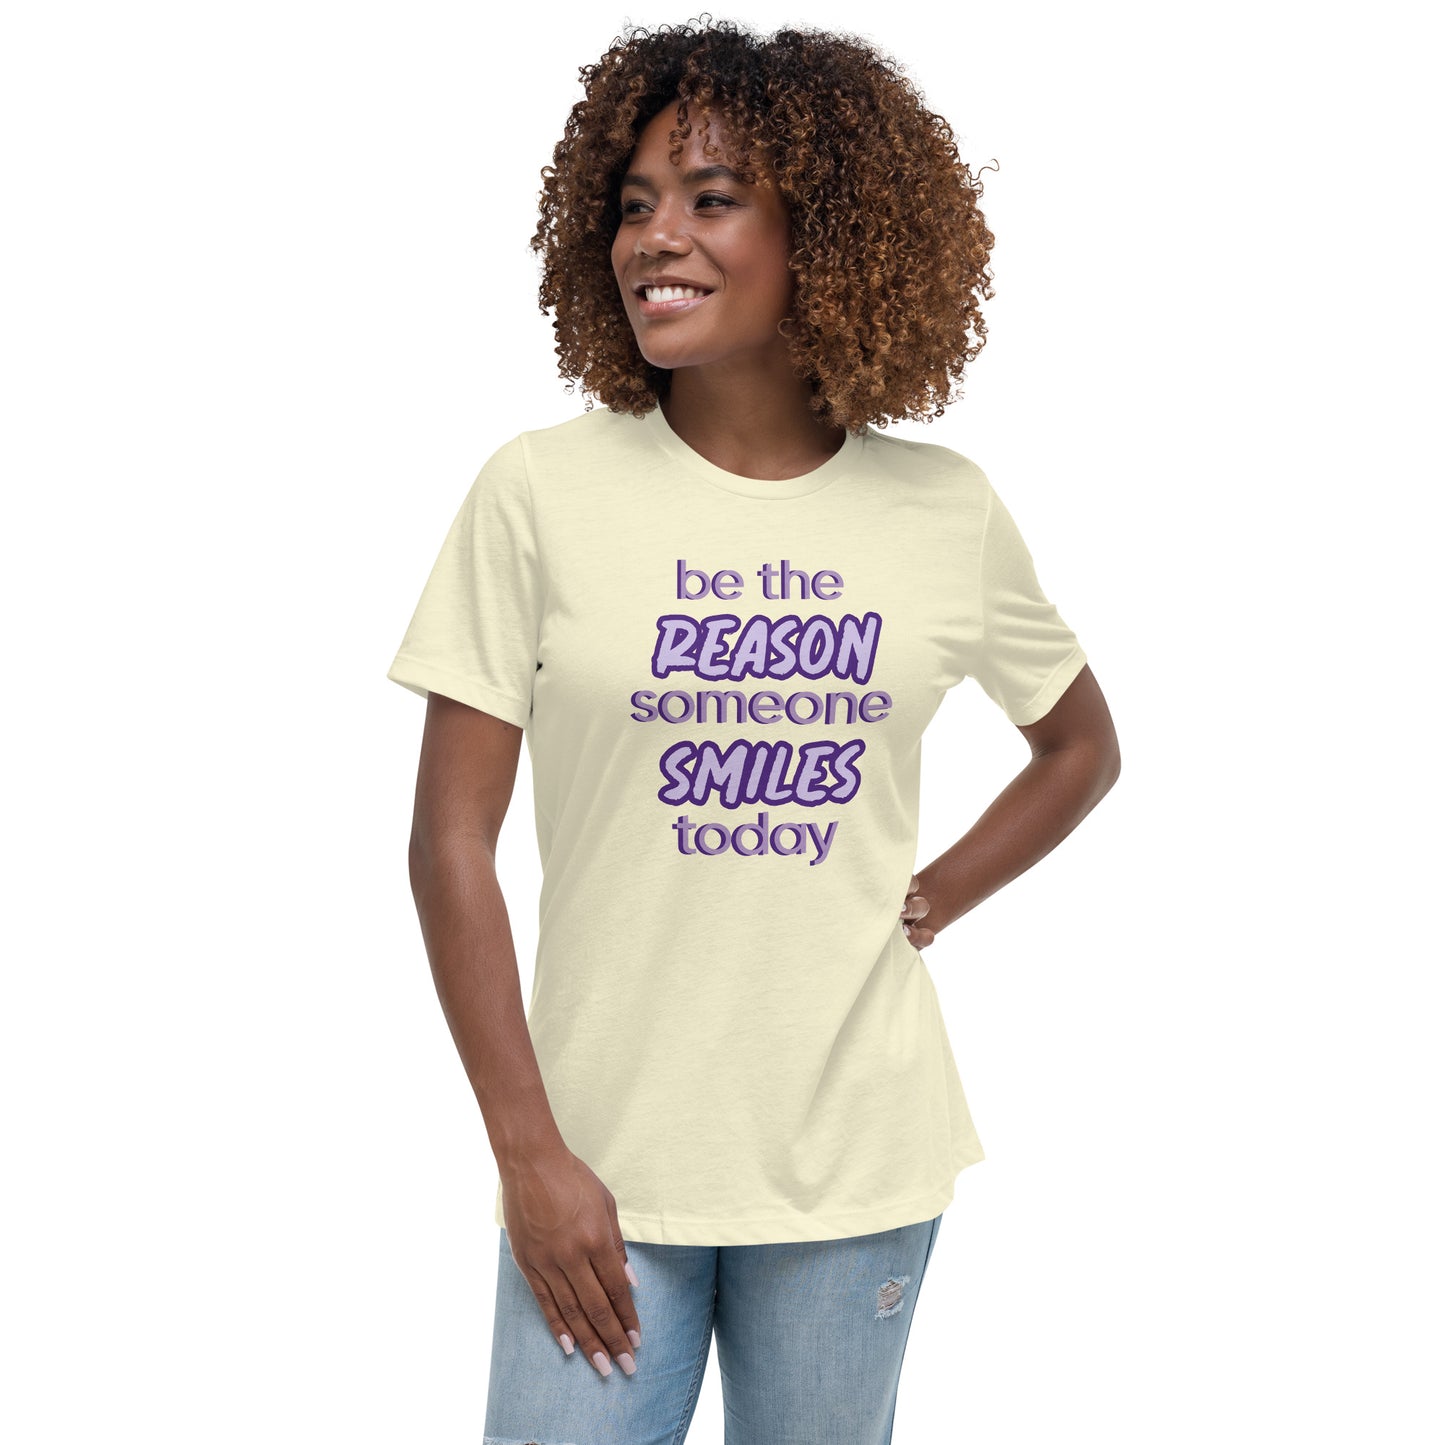 Woman with citron T-shirt and the quote "be the reason someone smiles today" in purple on it. 